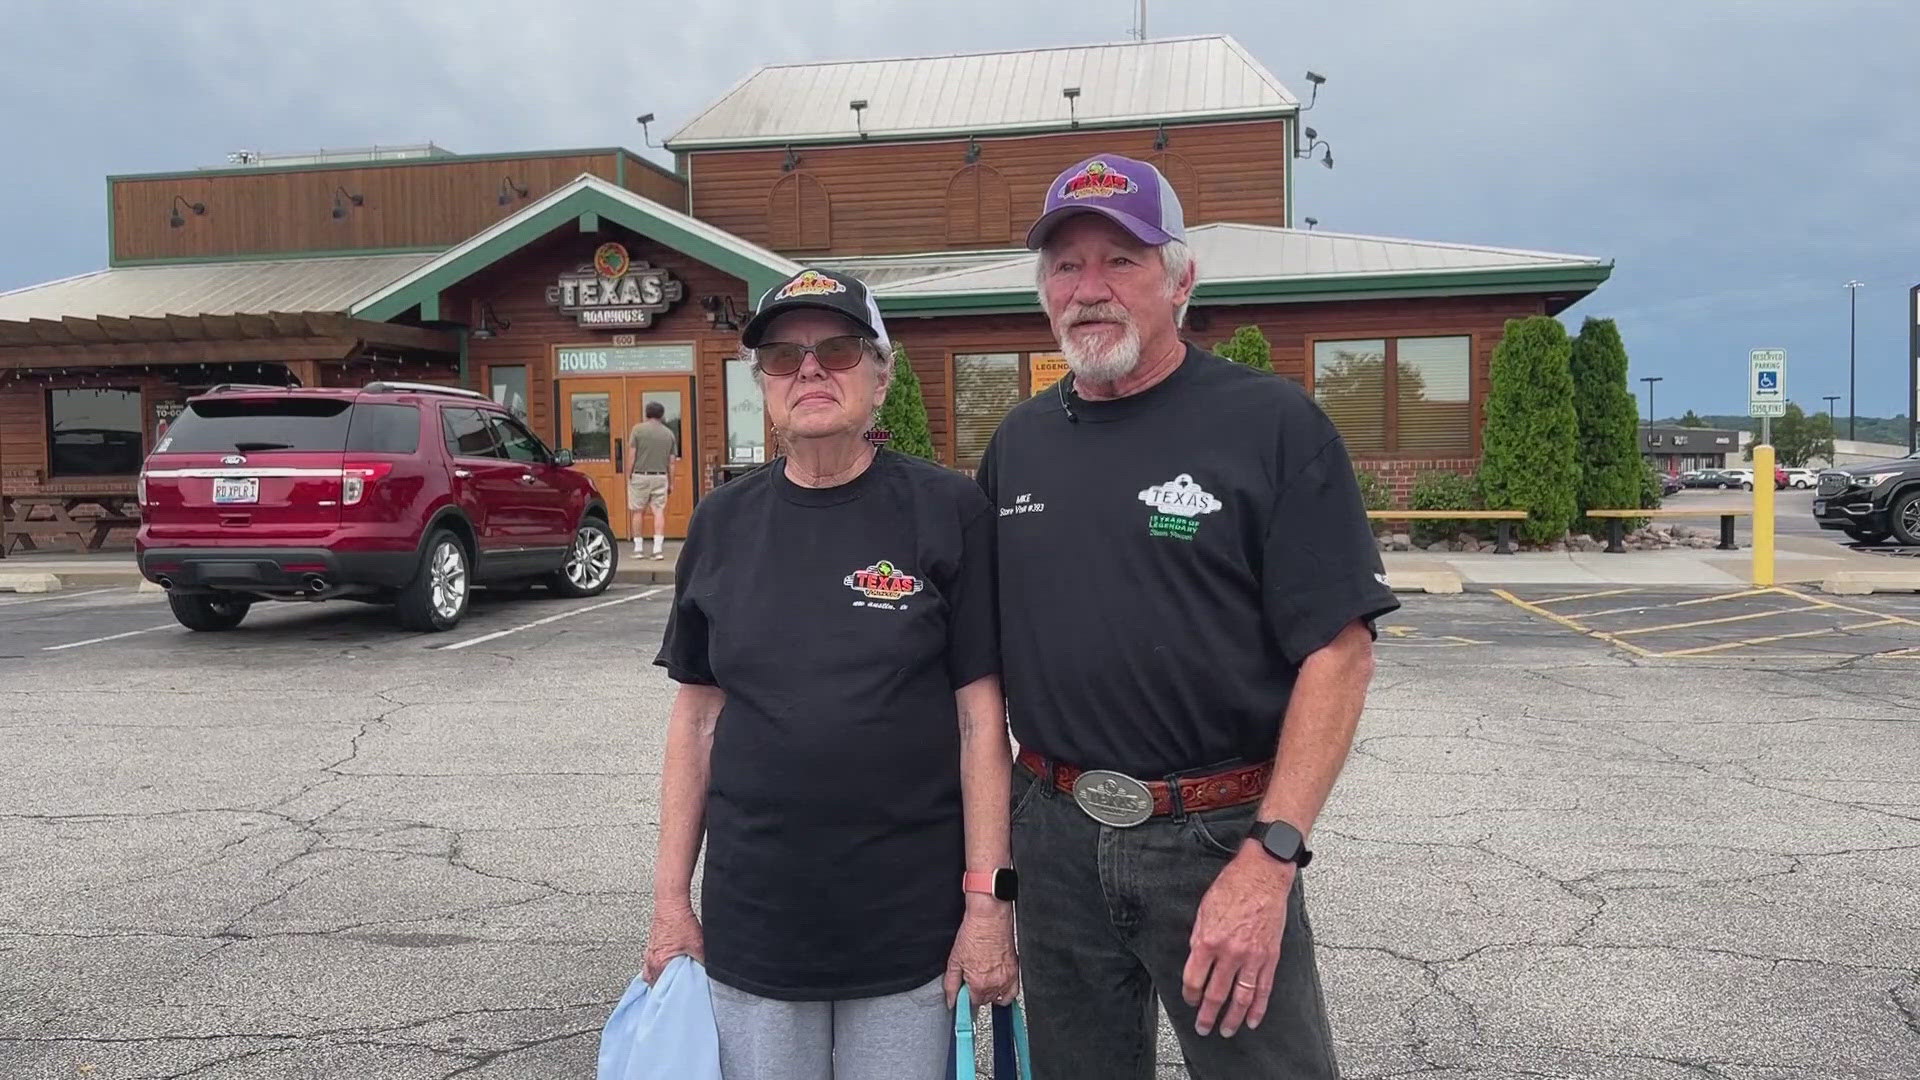 Judy and Mike McNamara said they're driving about 25,000 each year to visit Texas Roadhouse locations across the United States.